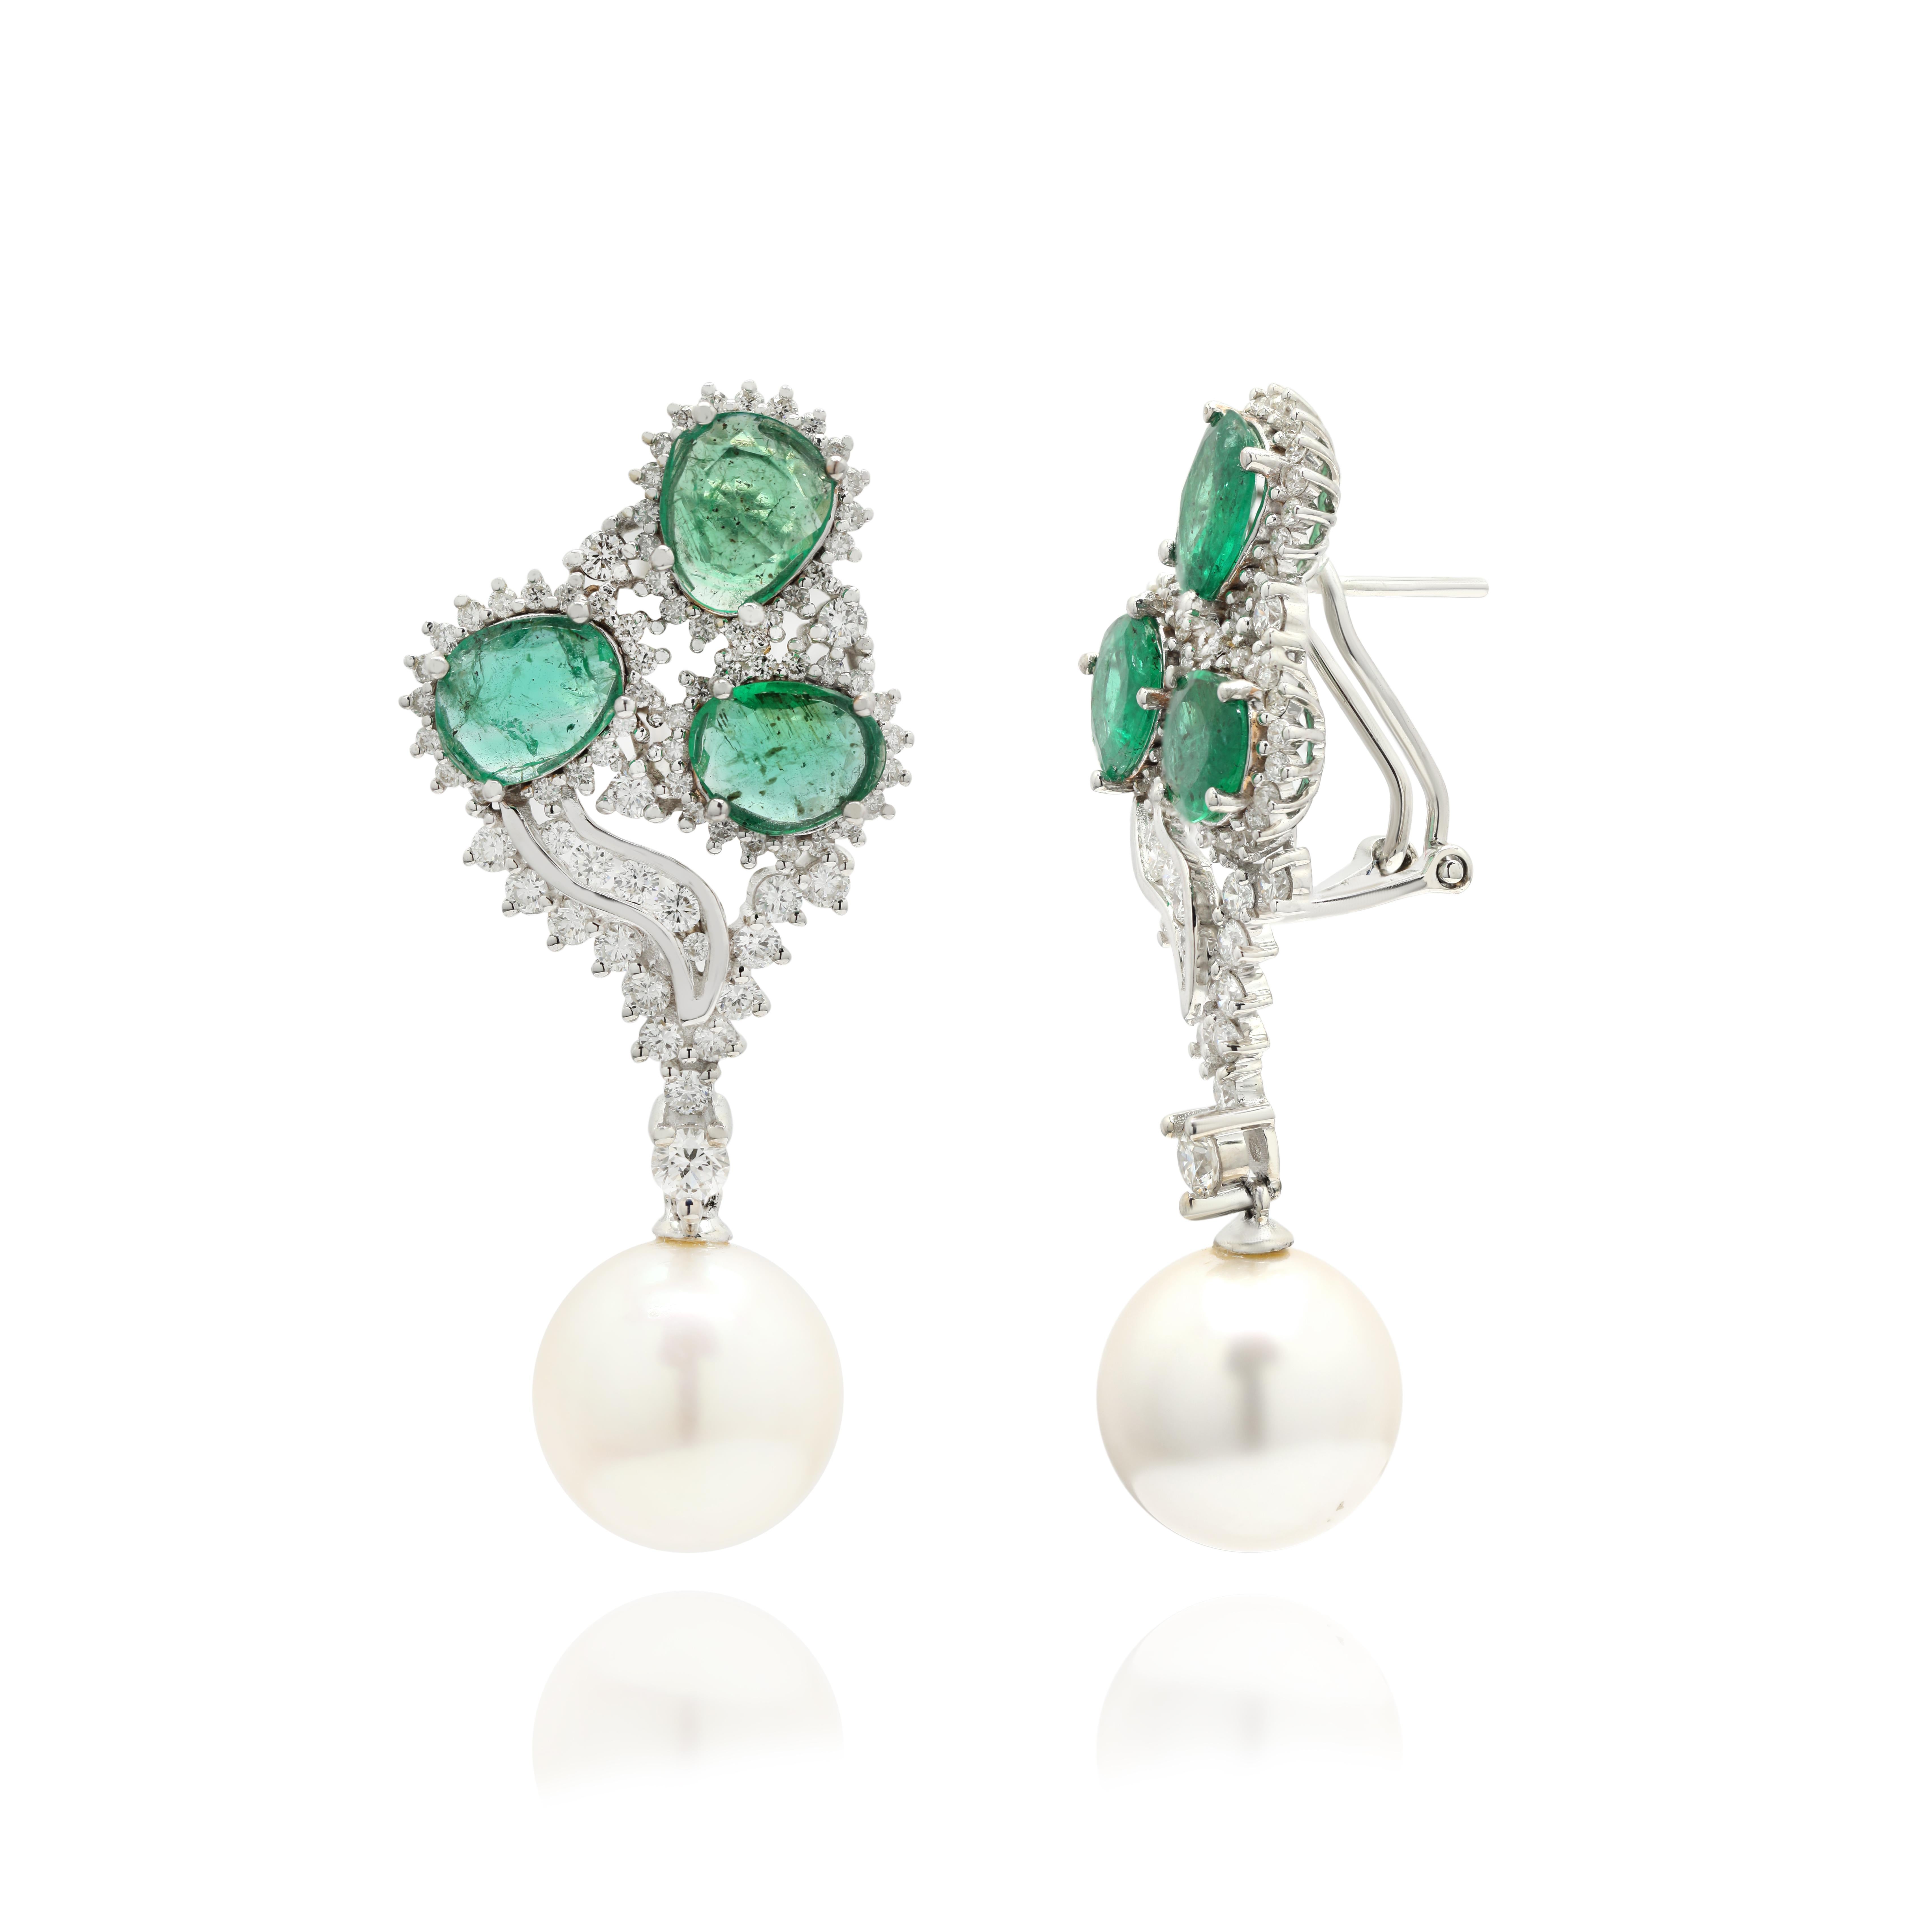 Art Nouveau Astounding 14K White Gold 29.56 ct Emerald and Diamond Earrings with Pearl  For Sale